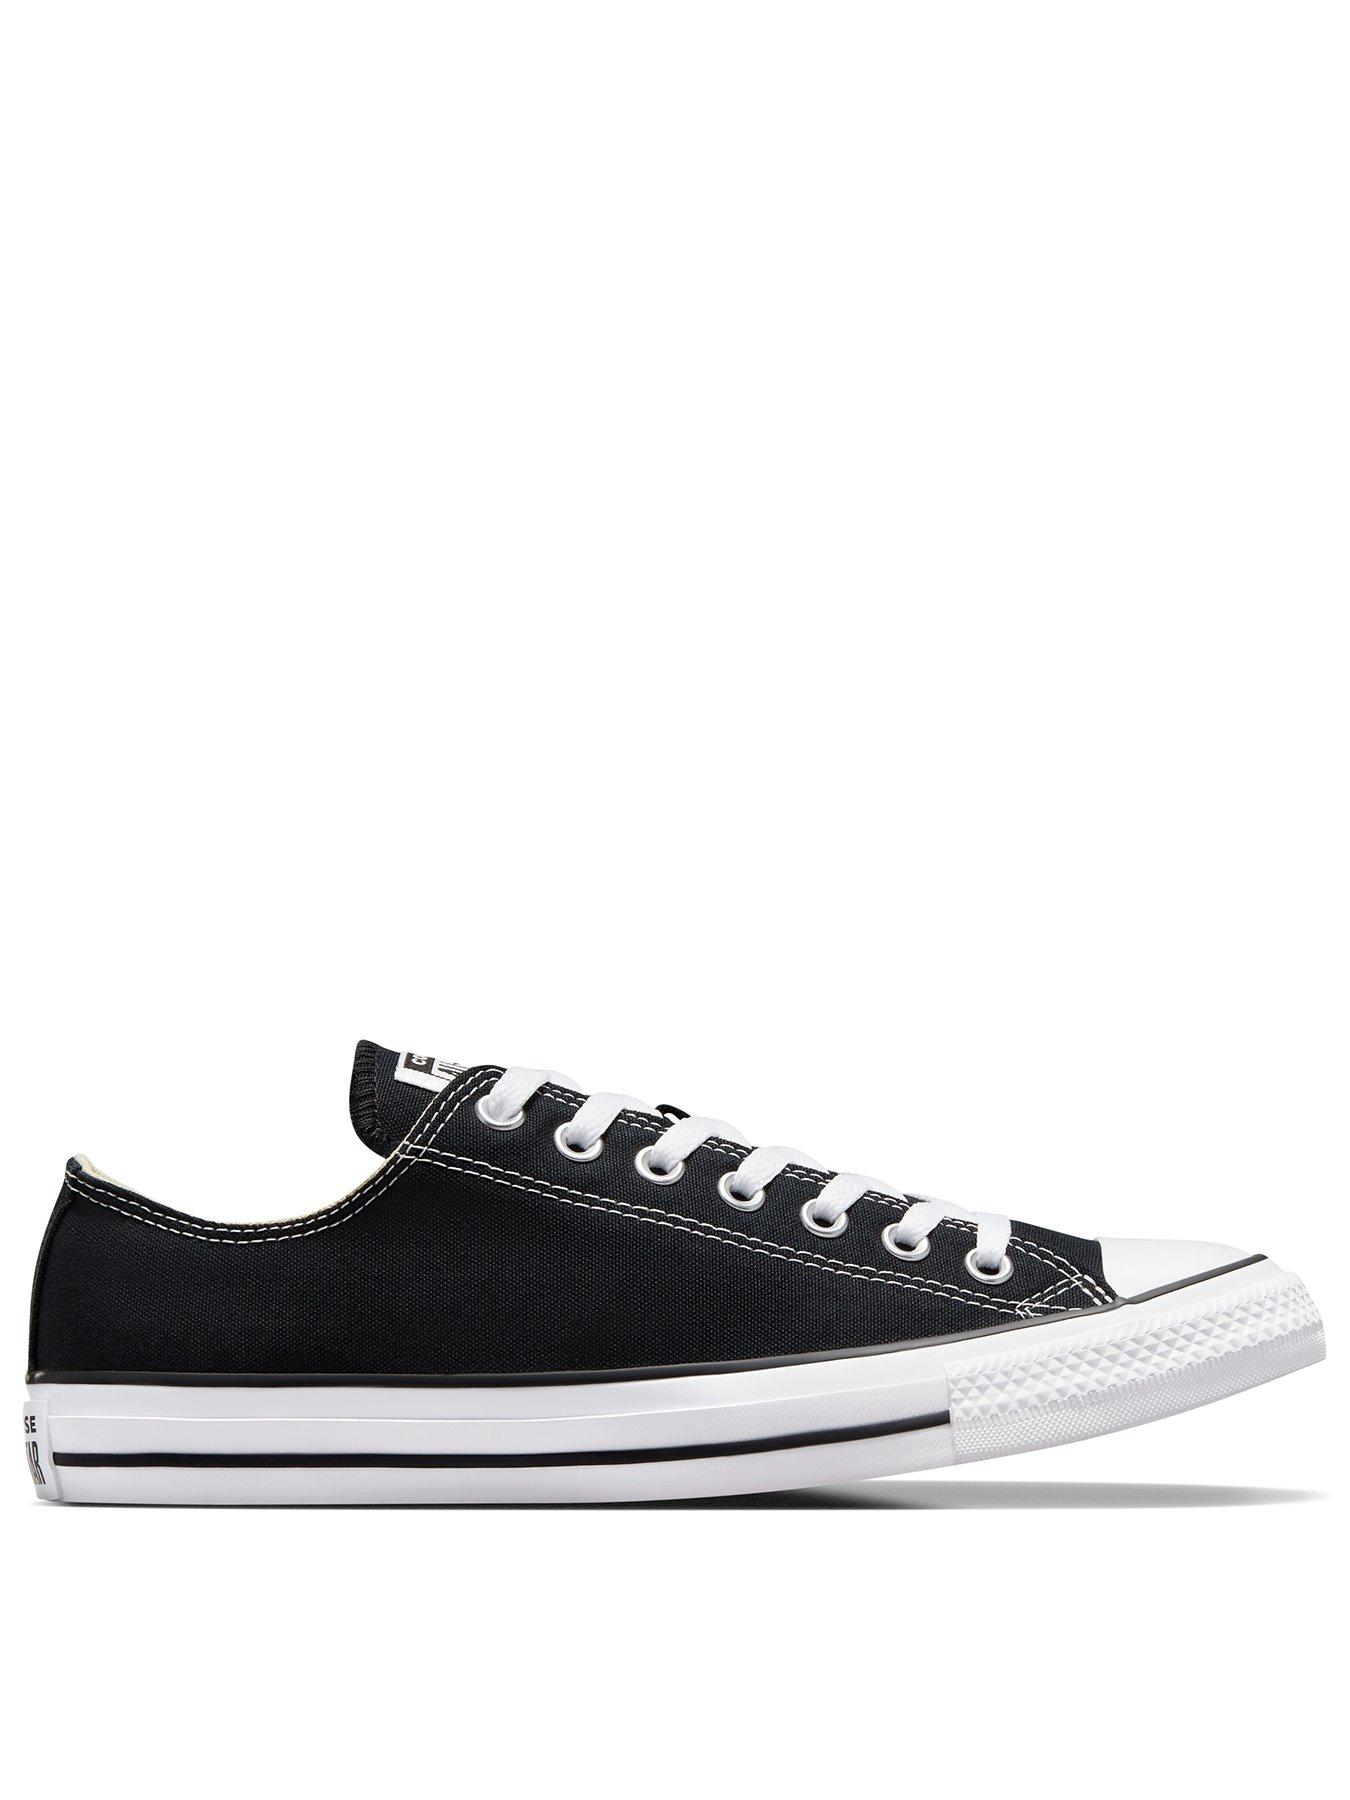 Converse Trainers | Mens Converse Shoes 